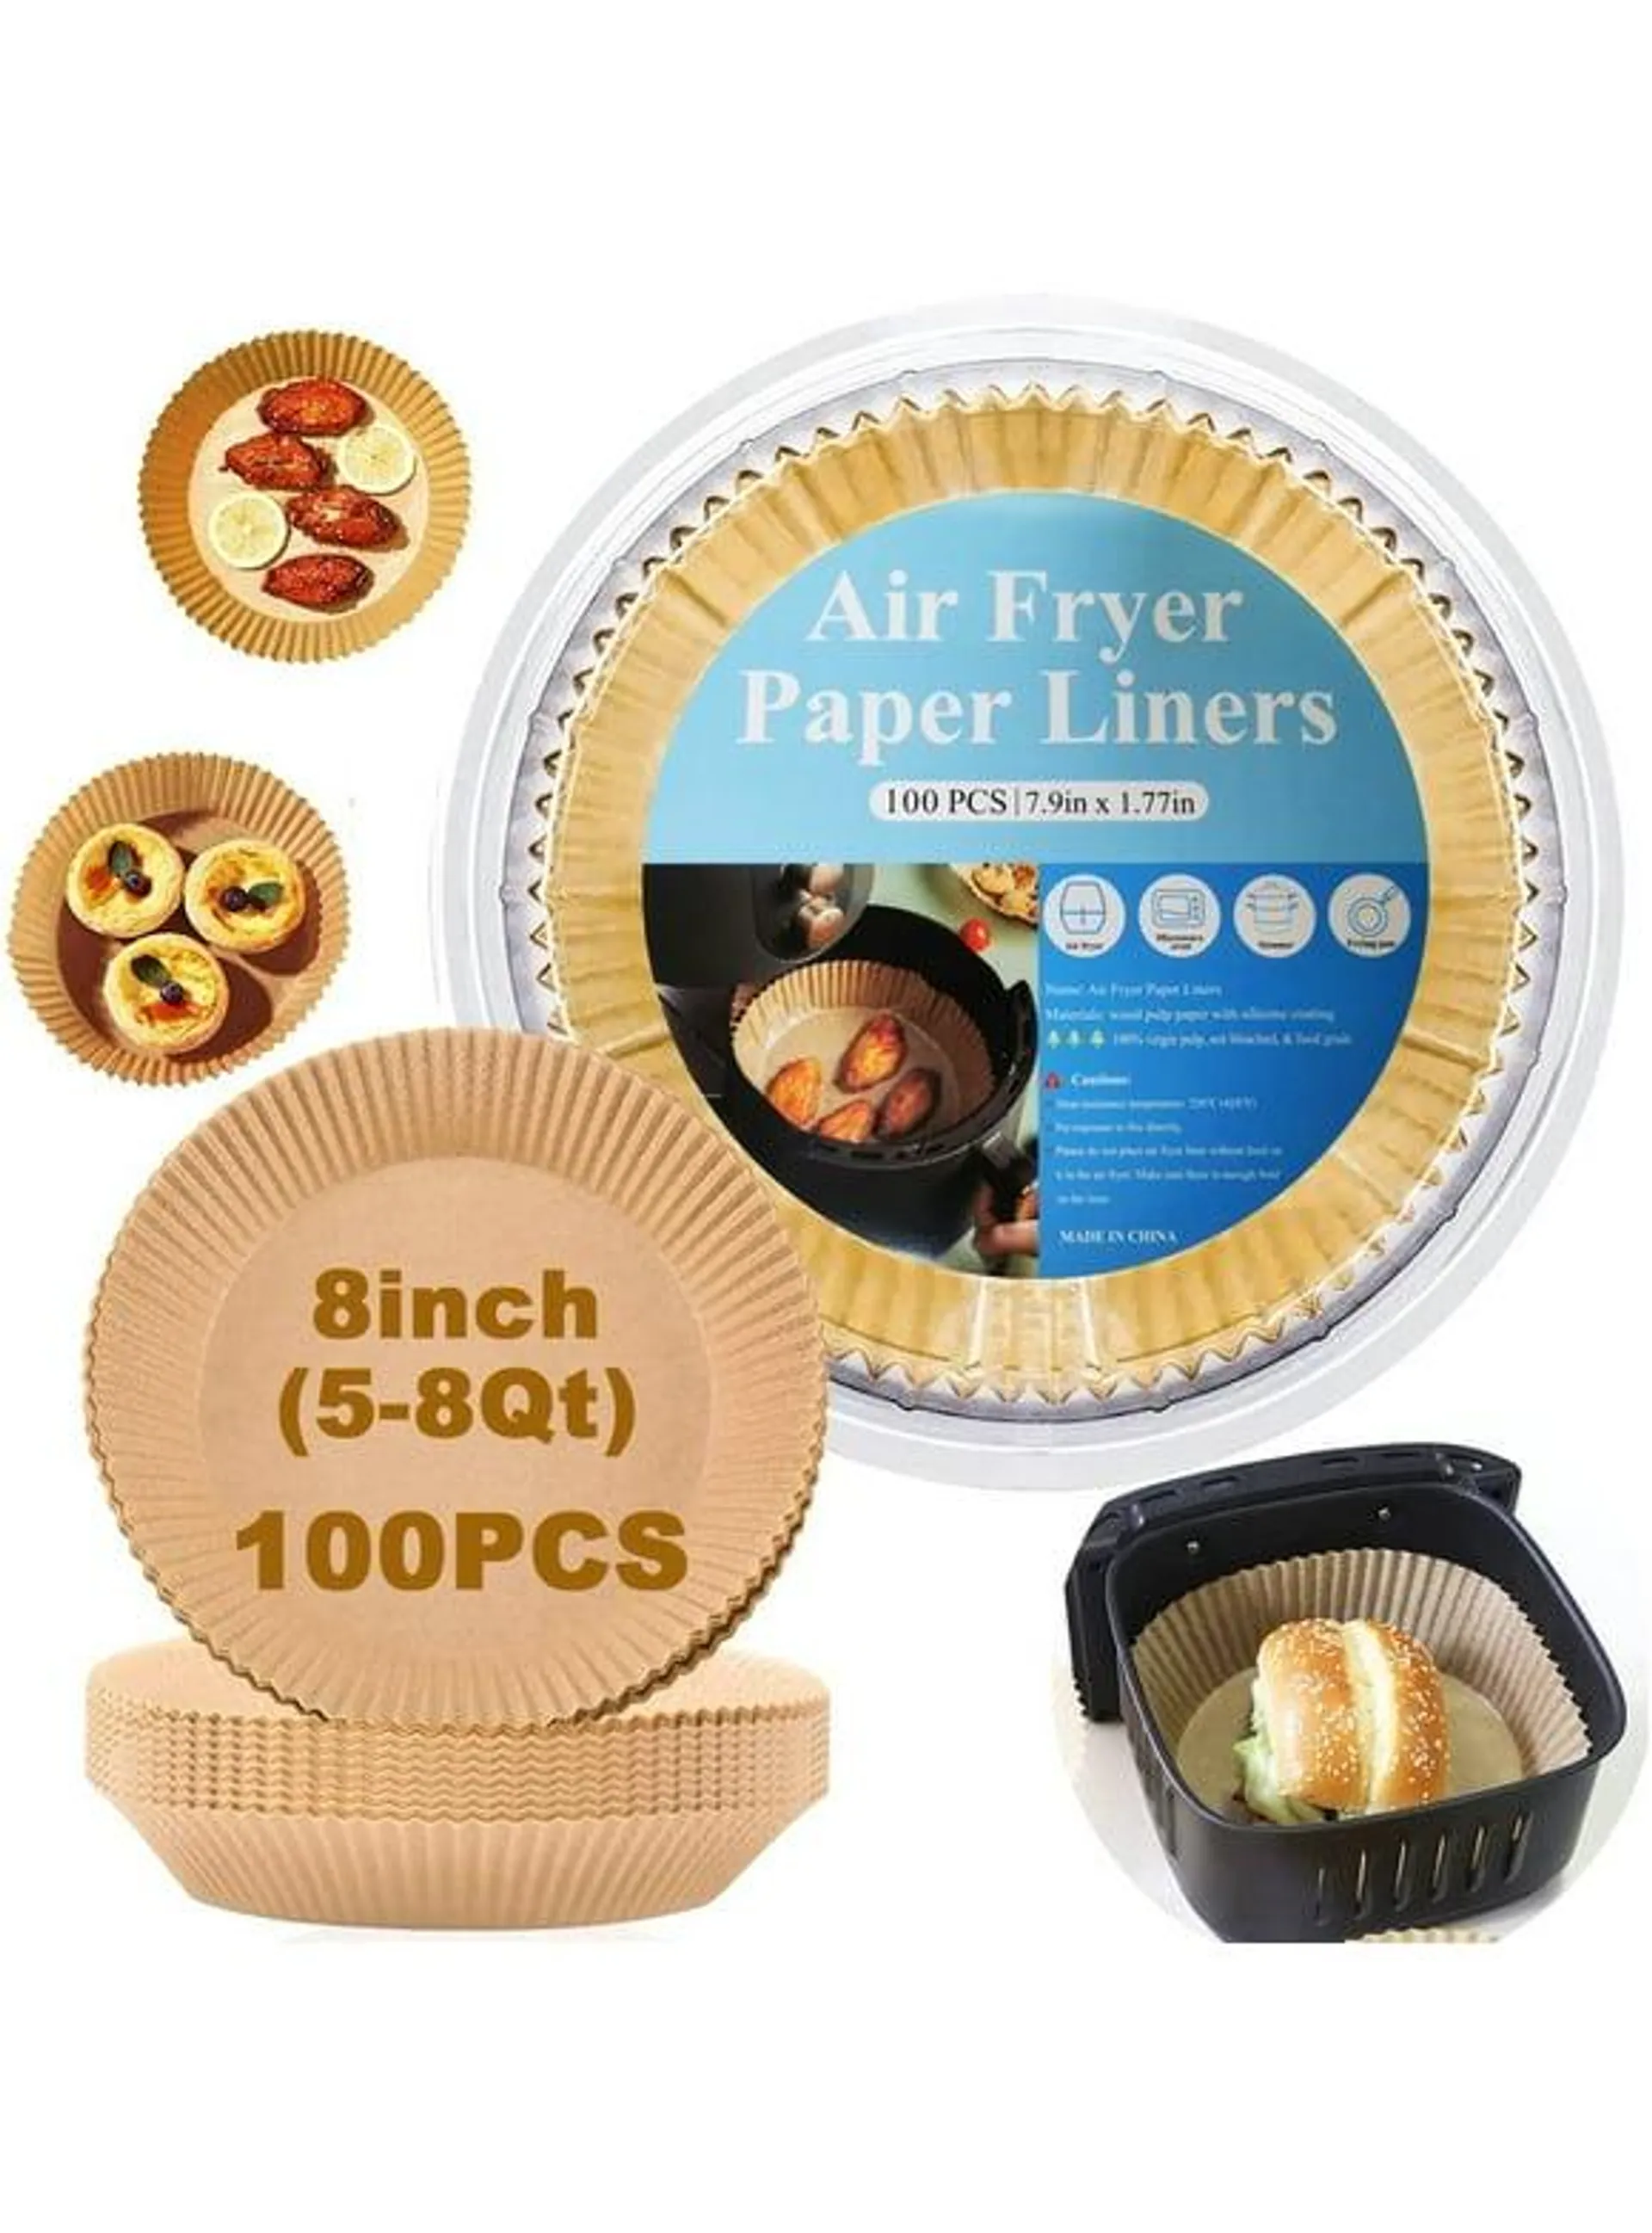 M BUDER Air Fryer Disposable Paper Liners, 100PCS Non-Stick Air Fryer Parchment Liner, Oil Resistant, Waterproof, Food Grade Baking Paper for 5-8 QT Air Fryer Baking Roasting Microwave 8inch